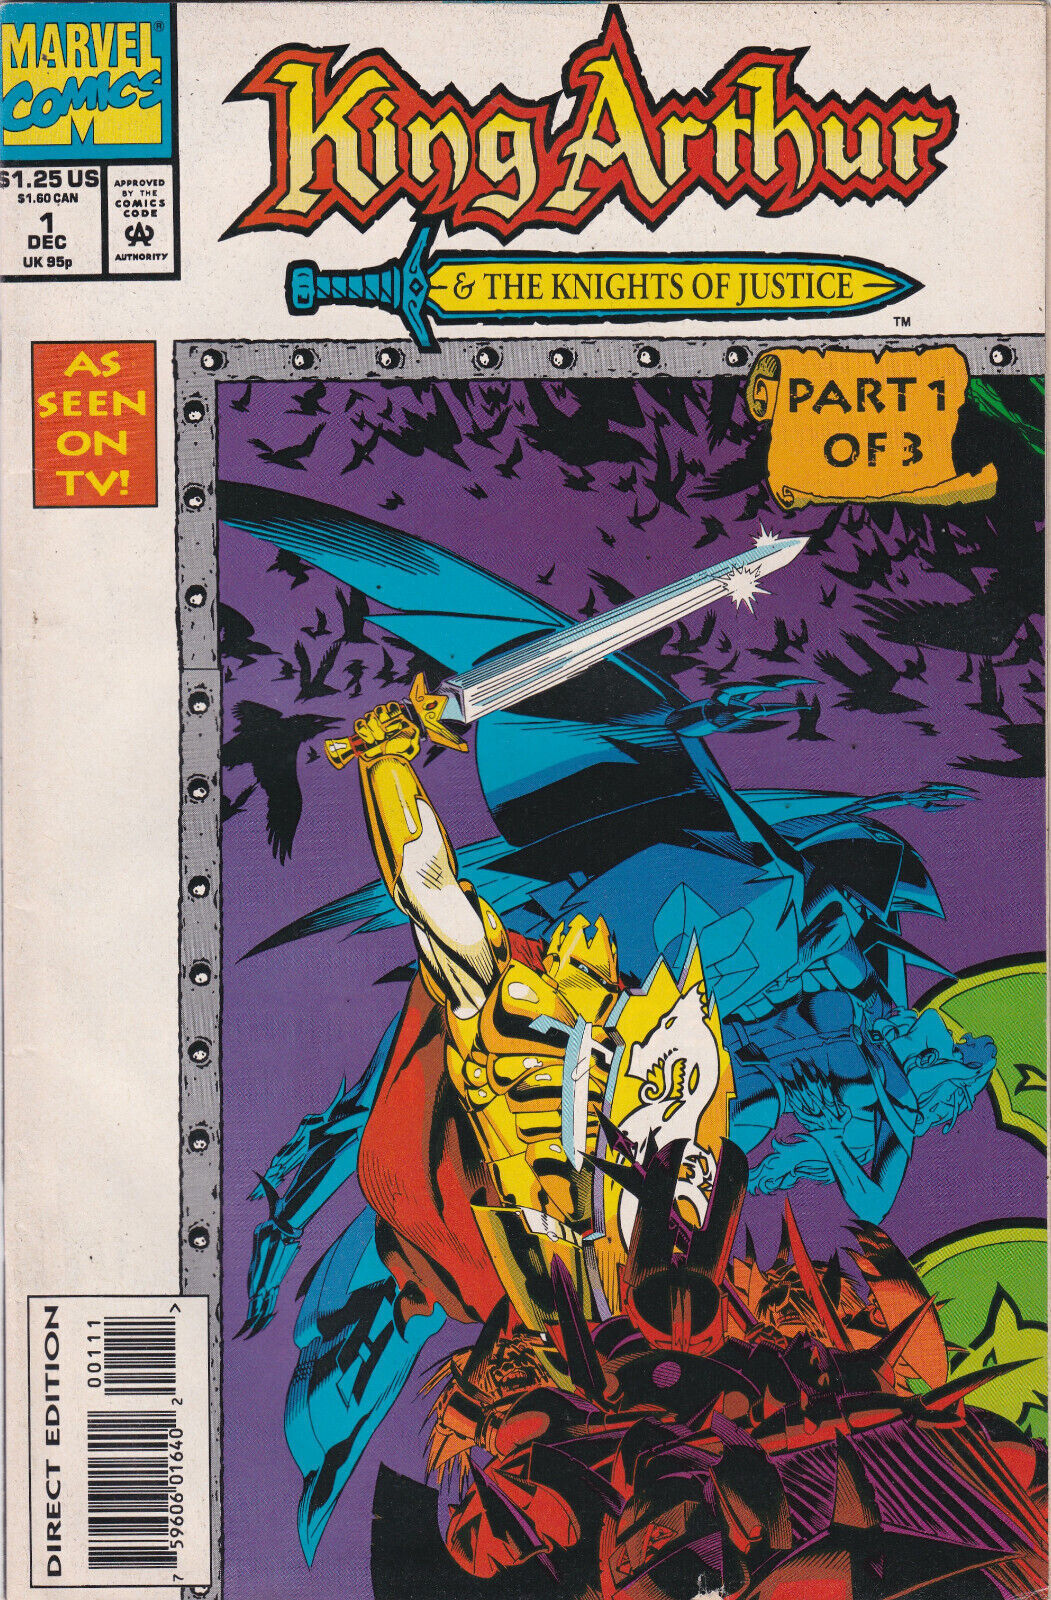 King Arthur and the Knights of Justice #1 (Dec 1993, Marvel)